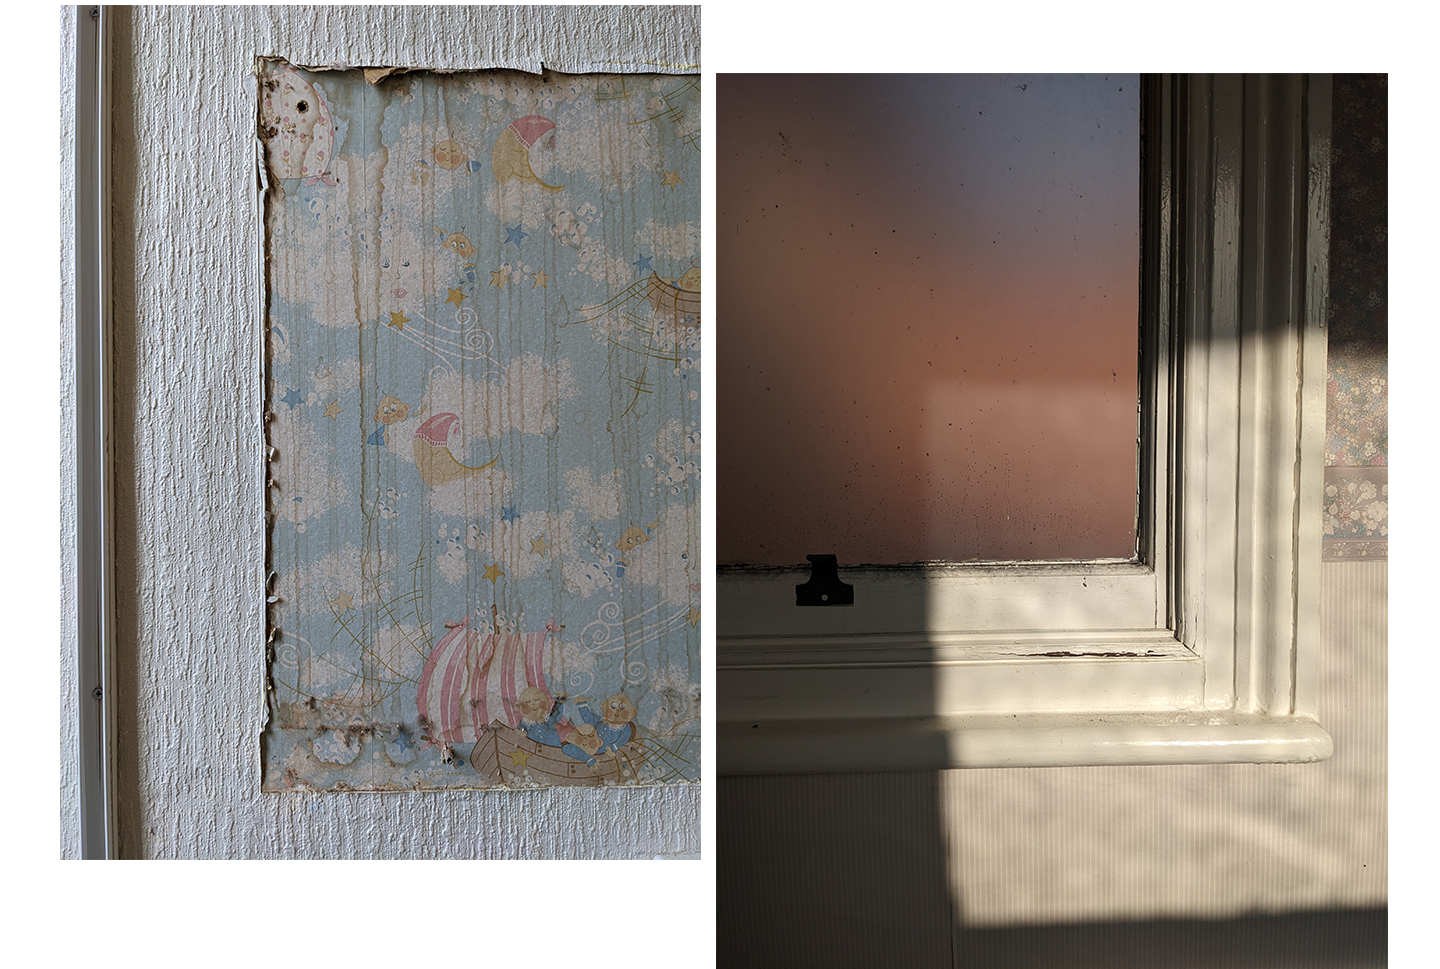 Two colour photos side by side, slightly misaligned, but in a way that aligns the horizontal details in the pictures. Both close-ups of walls of an old building, the left a rectangle of old cartoon wallpaper shows underneath some textured white wallpaper; on the right, a square of light falls against a wood-framed frosted glass window.